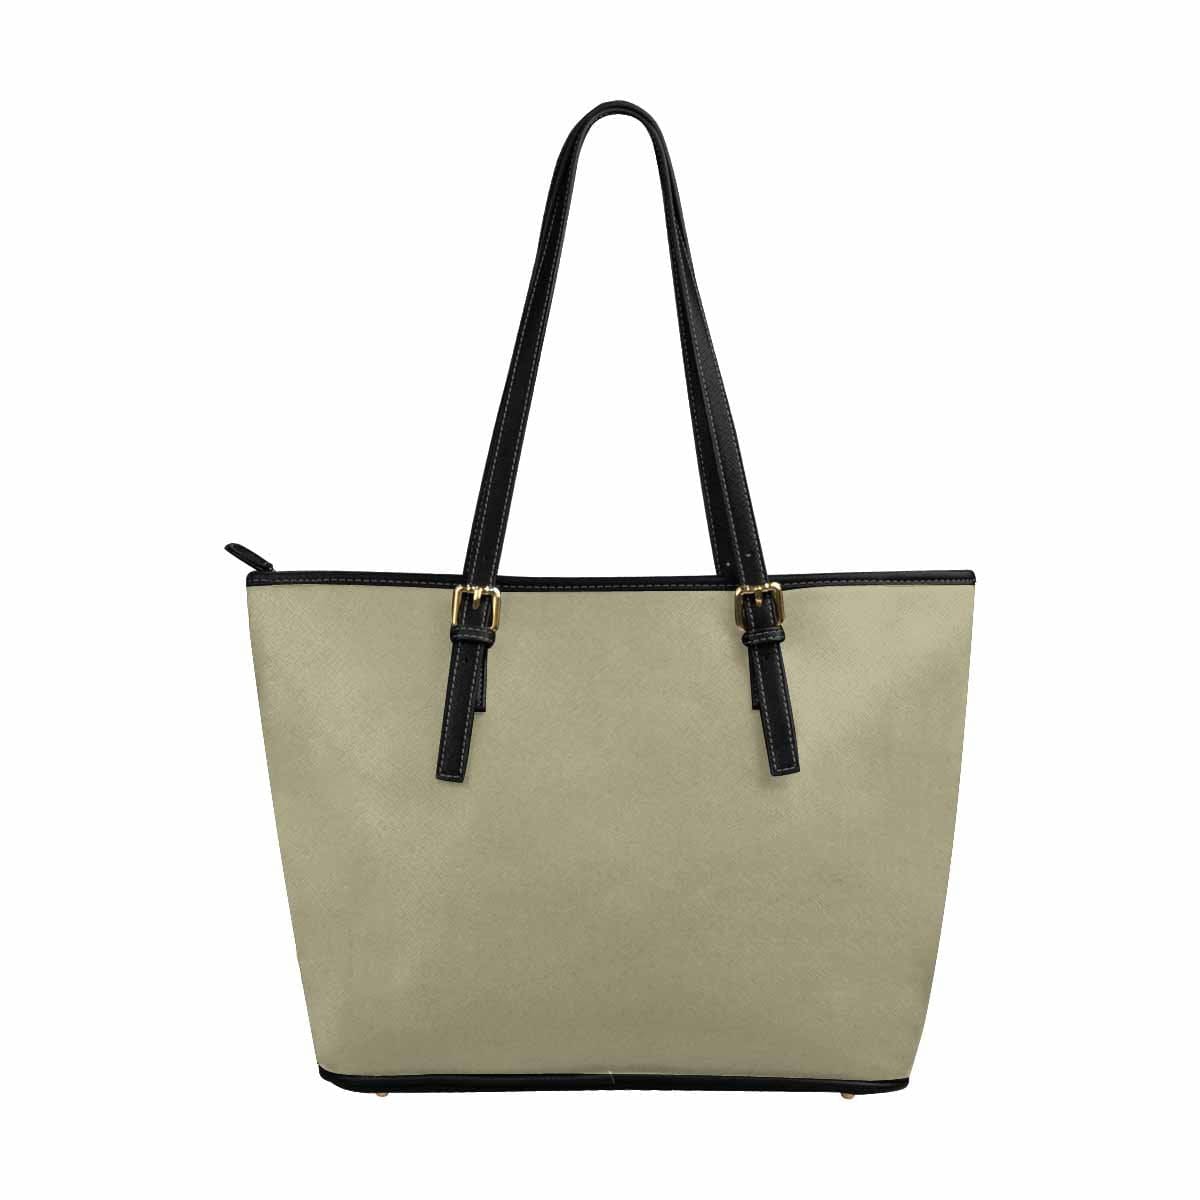 Large Leather Tote Shoulder Bag - Dark Sage Green - Bags | Leather Tote Bags